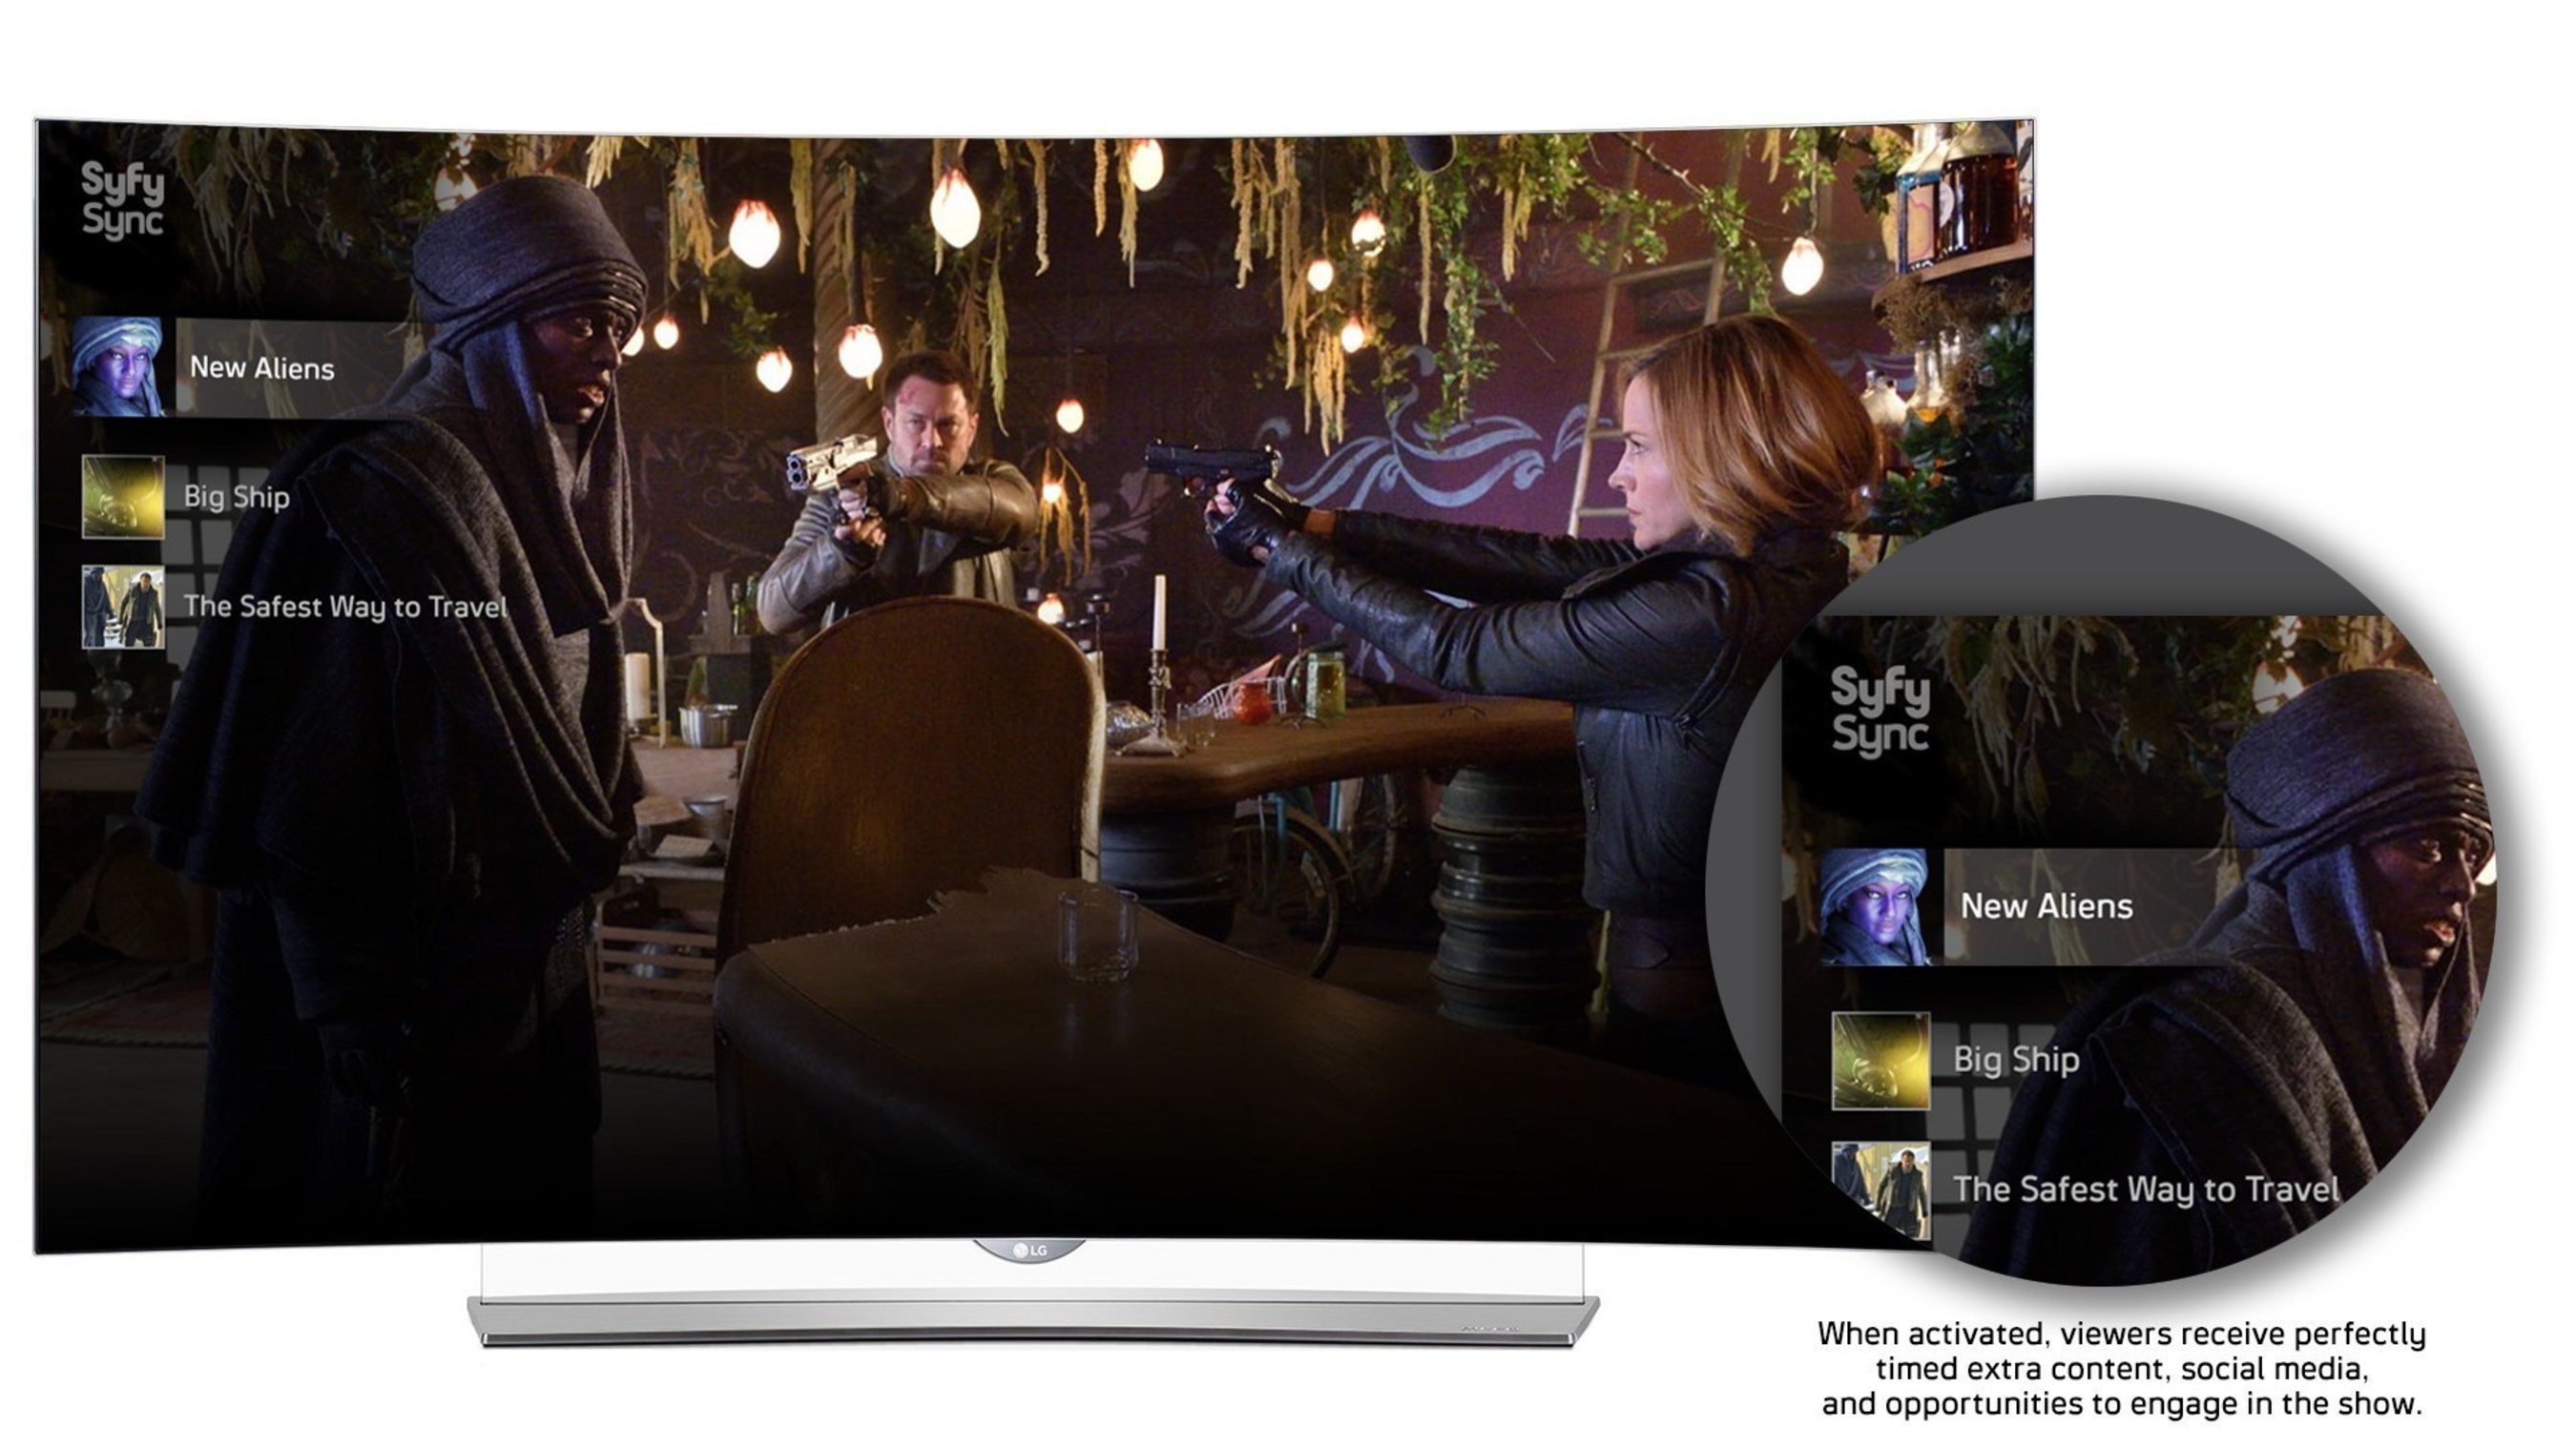 Syfy Sync for LG Smart TV is launching with the Season 3 premiere of fan favorite DEFIANCE on June 12 at 9/8c on Syfy.